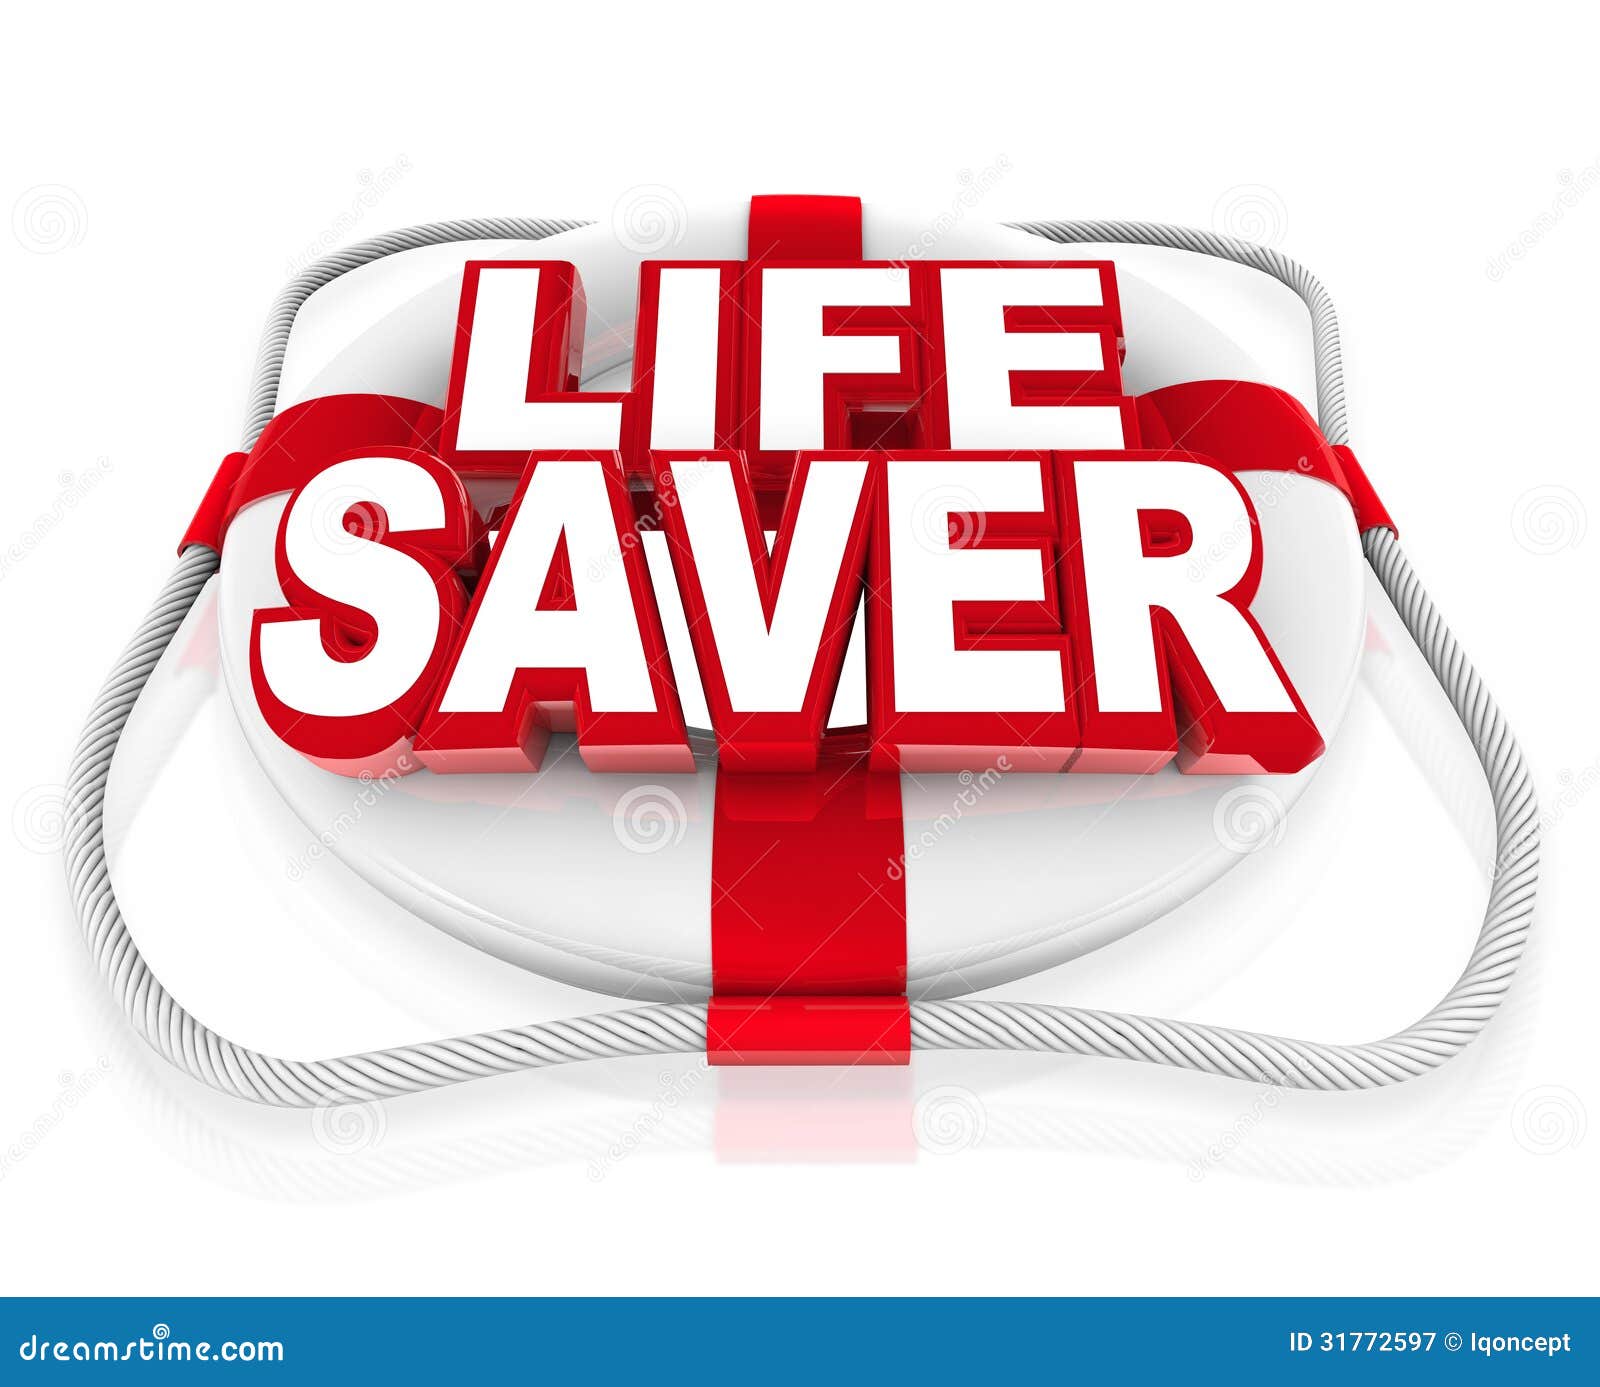 life saver preserver help in moment of crisis or danger